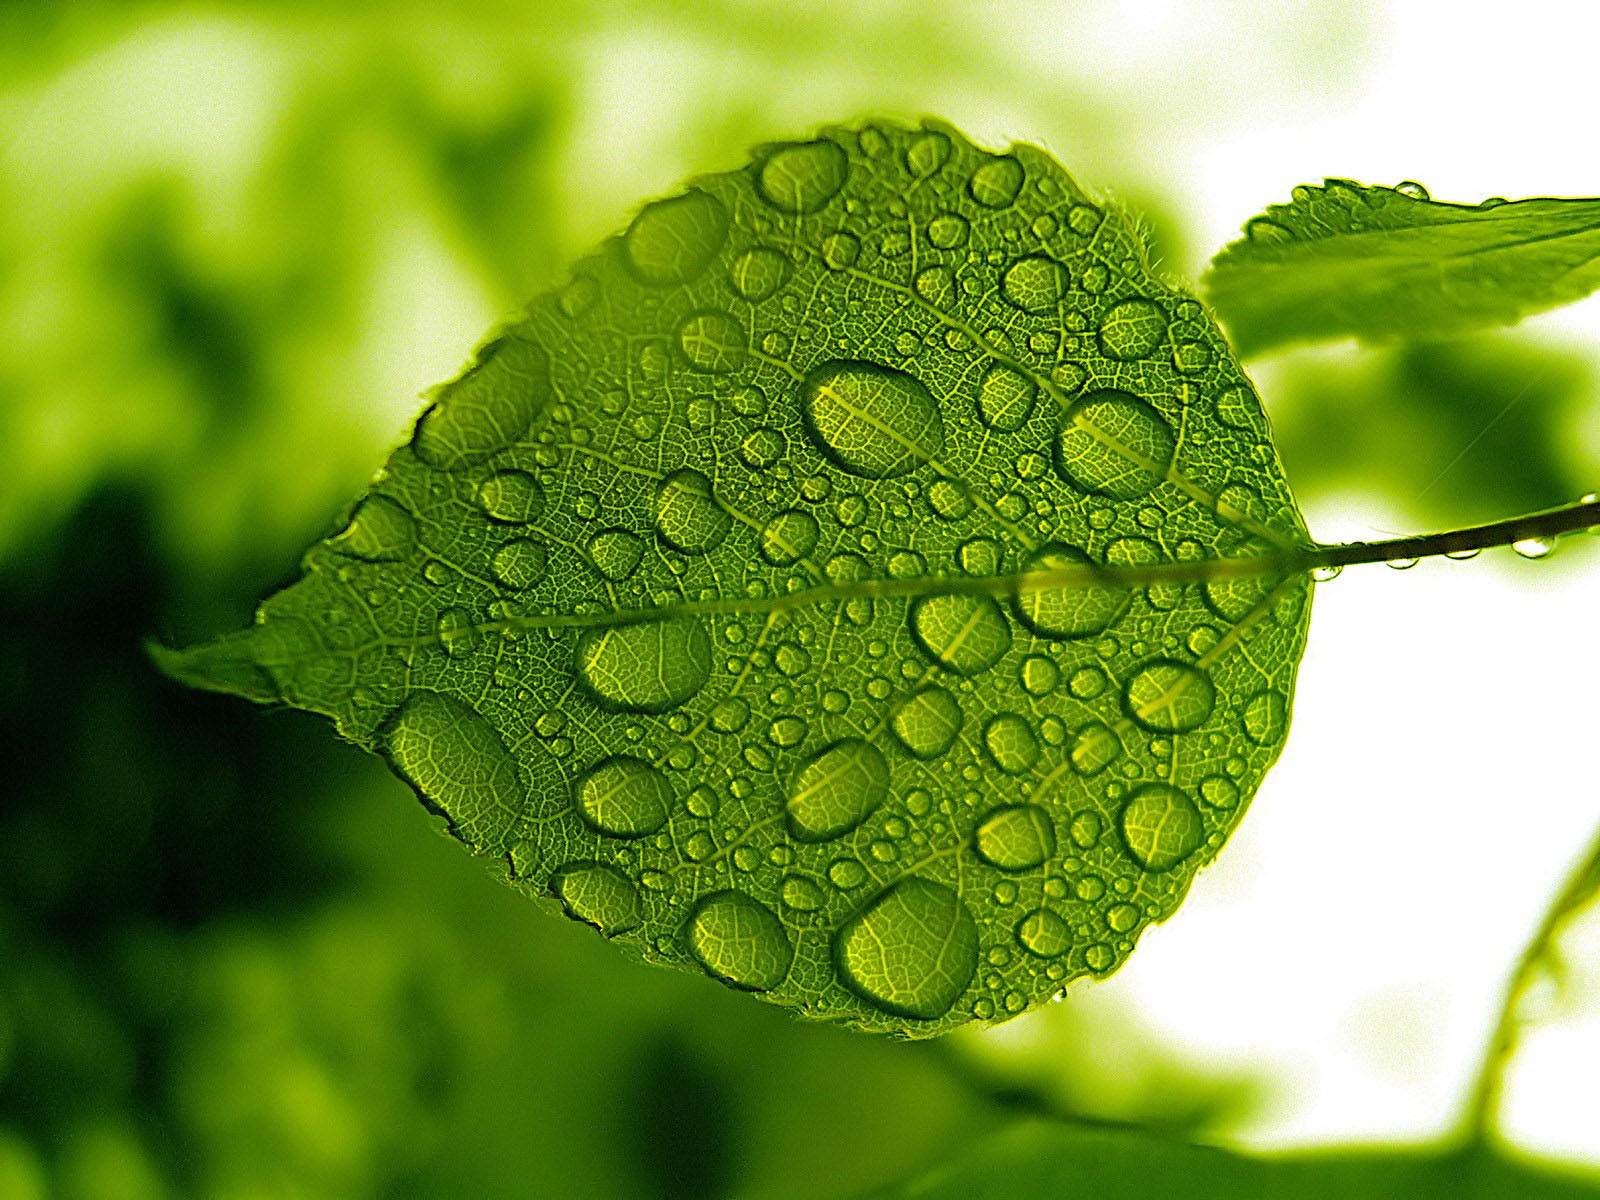 wallpapers: Water Drops on Leaf Wallpapers
